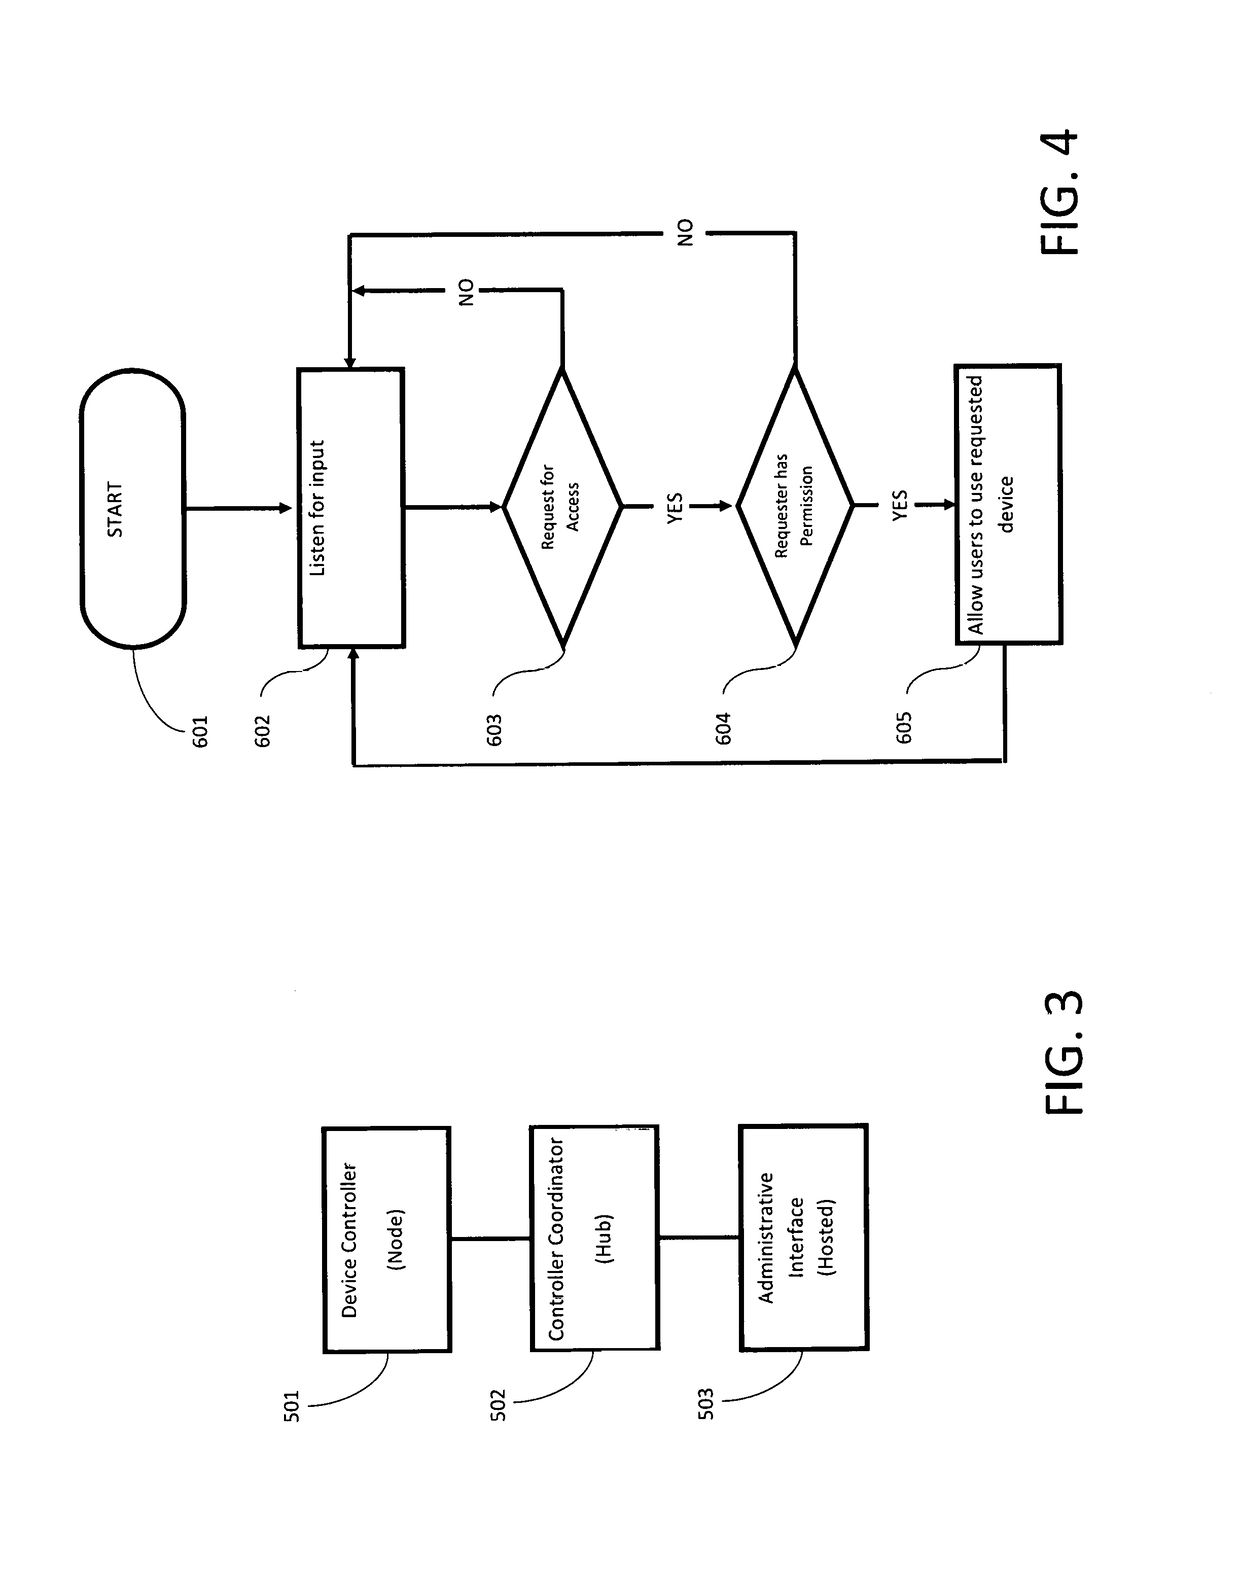 Card operated power plug interrupter/monitor and method of use